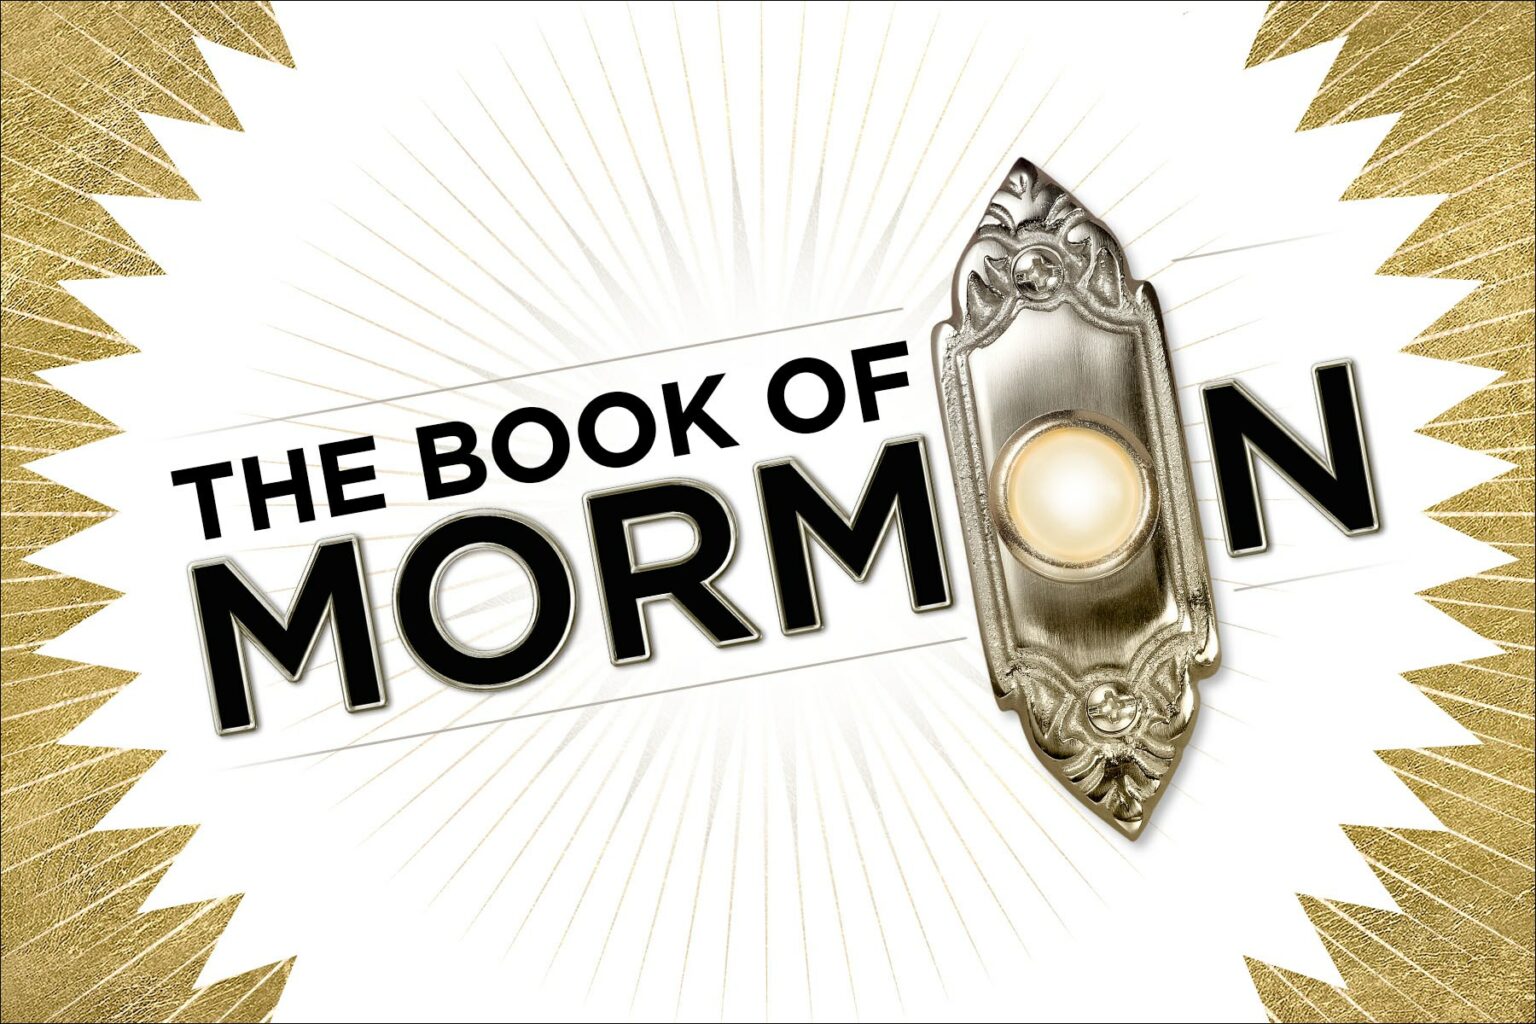 The Book of Mormon, Broadway Musical